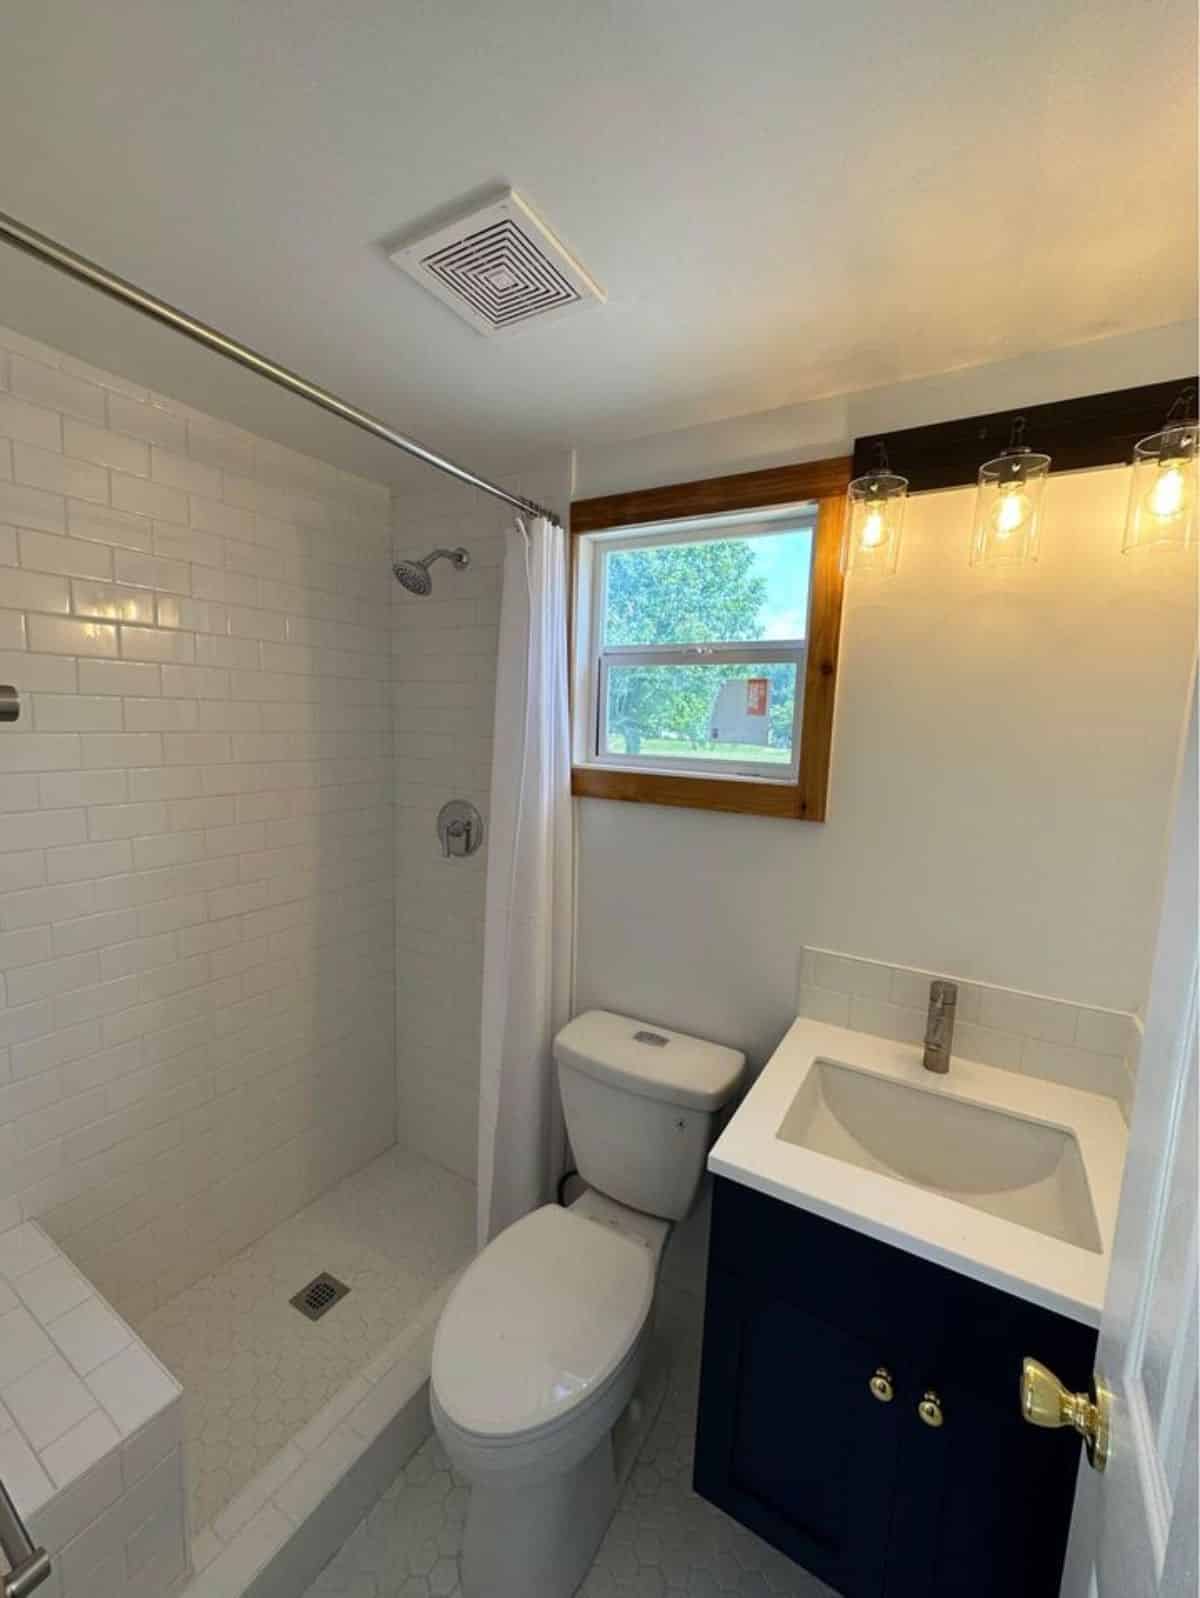 bathroom of stunning tiny home has all the standard fittings